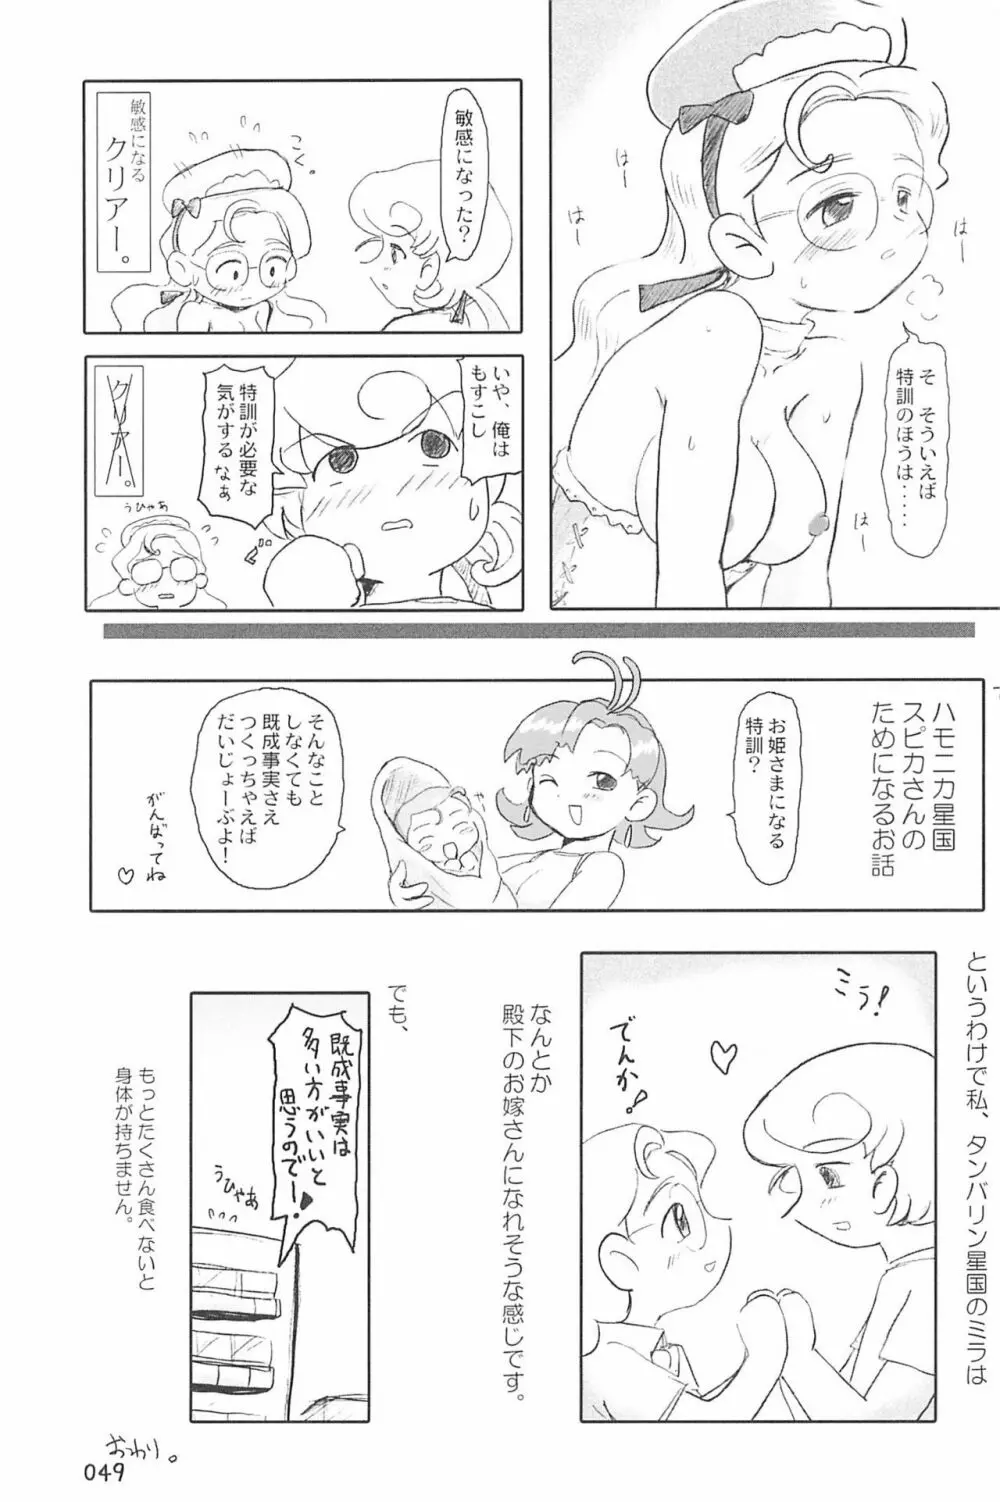 ND-special Volume 4 49ページ